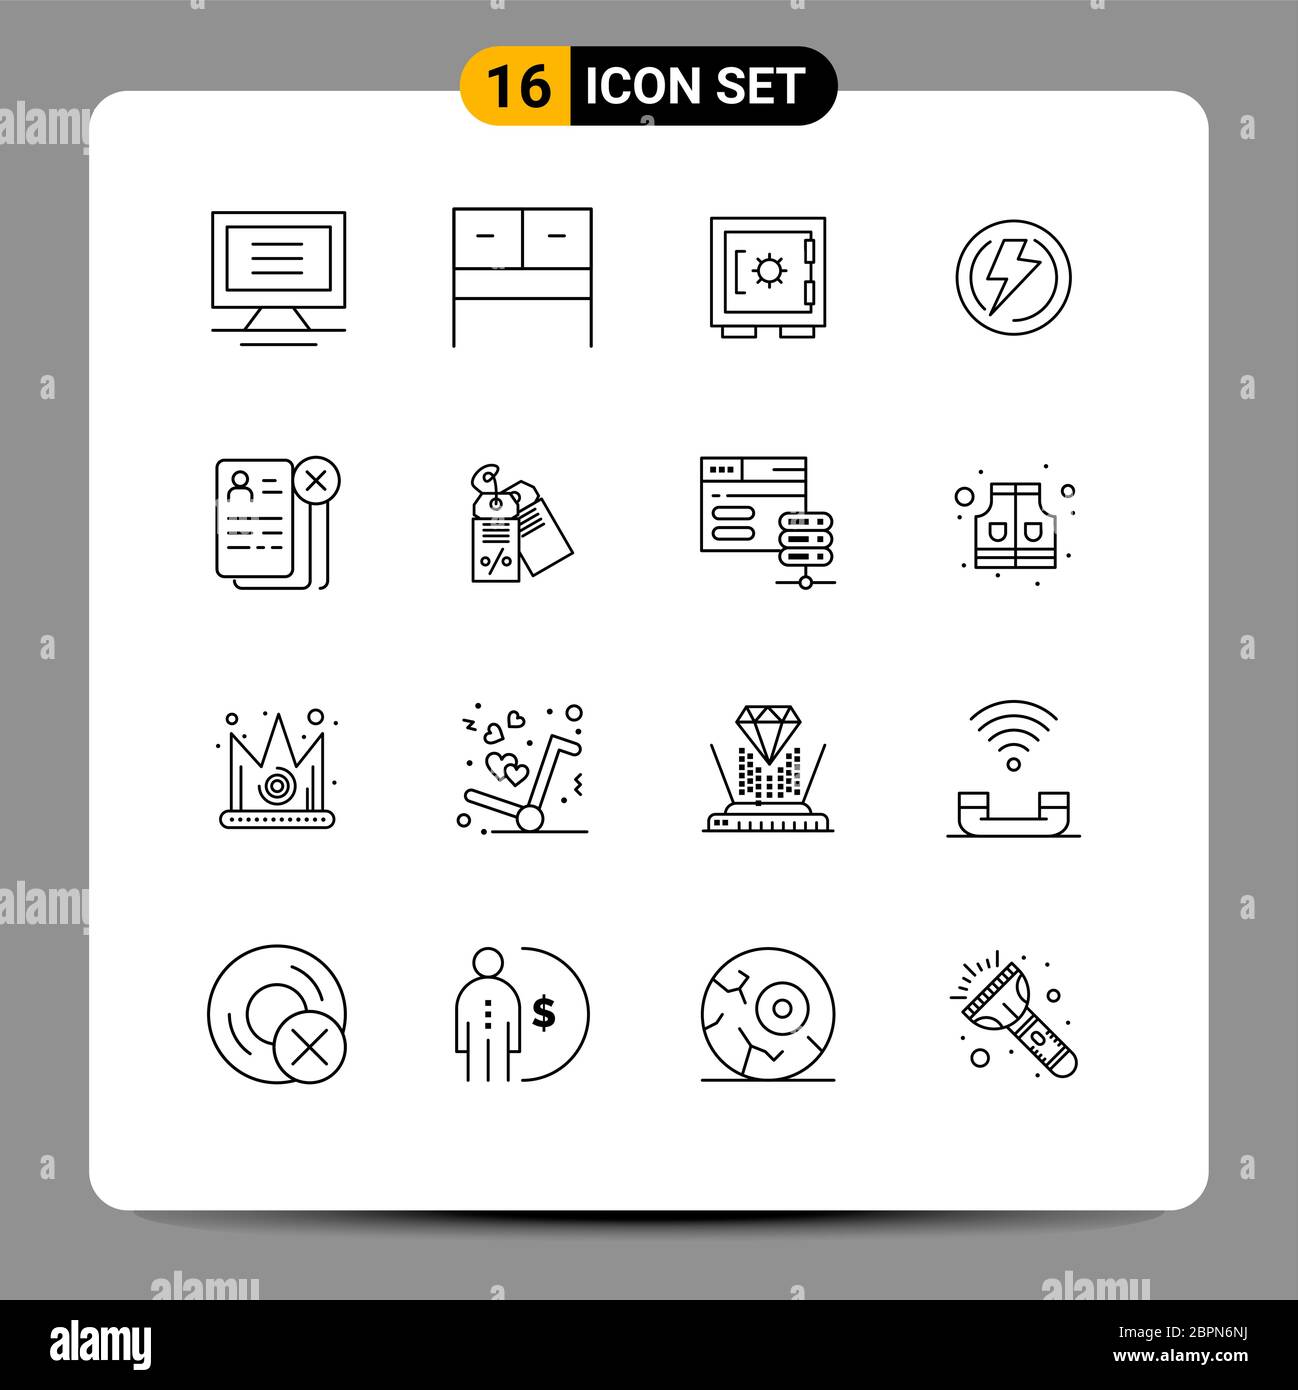 Pictogram Set of 16 Simple Outlines of cv, business, security, power, voltage Editable Vector Design Elements Stock Vector